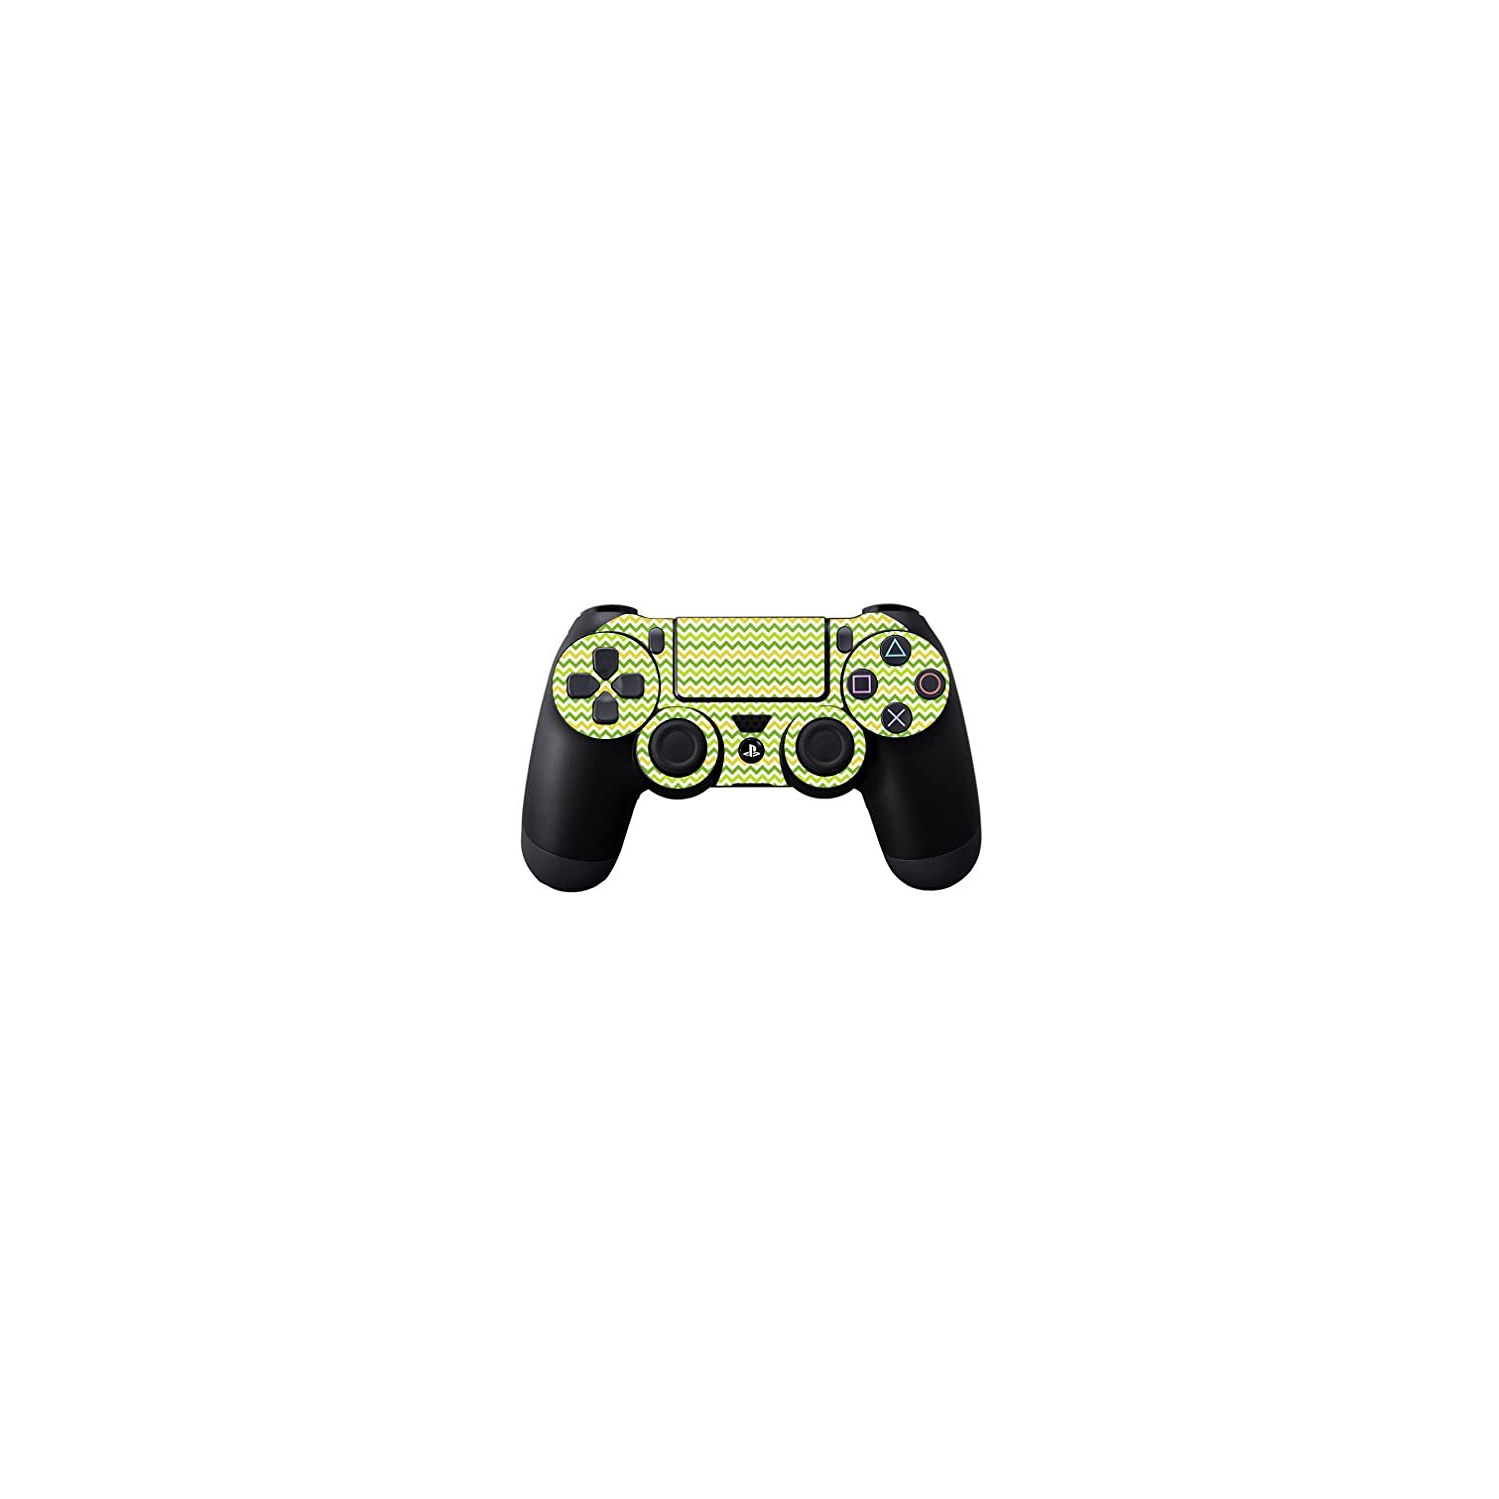 MightySkins Skin Compatible With Sony PlayStation DualShock 4 Controller wrap sticker skins Citrus Chevron